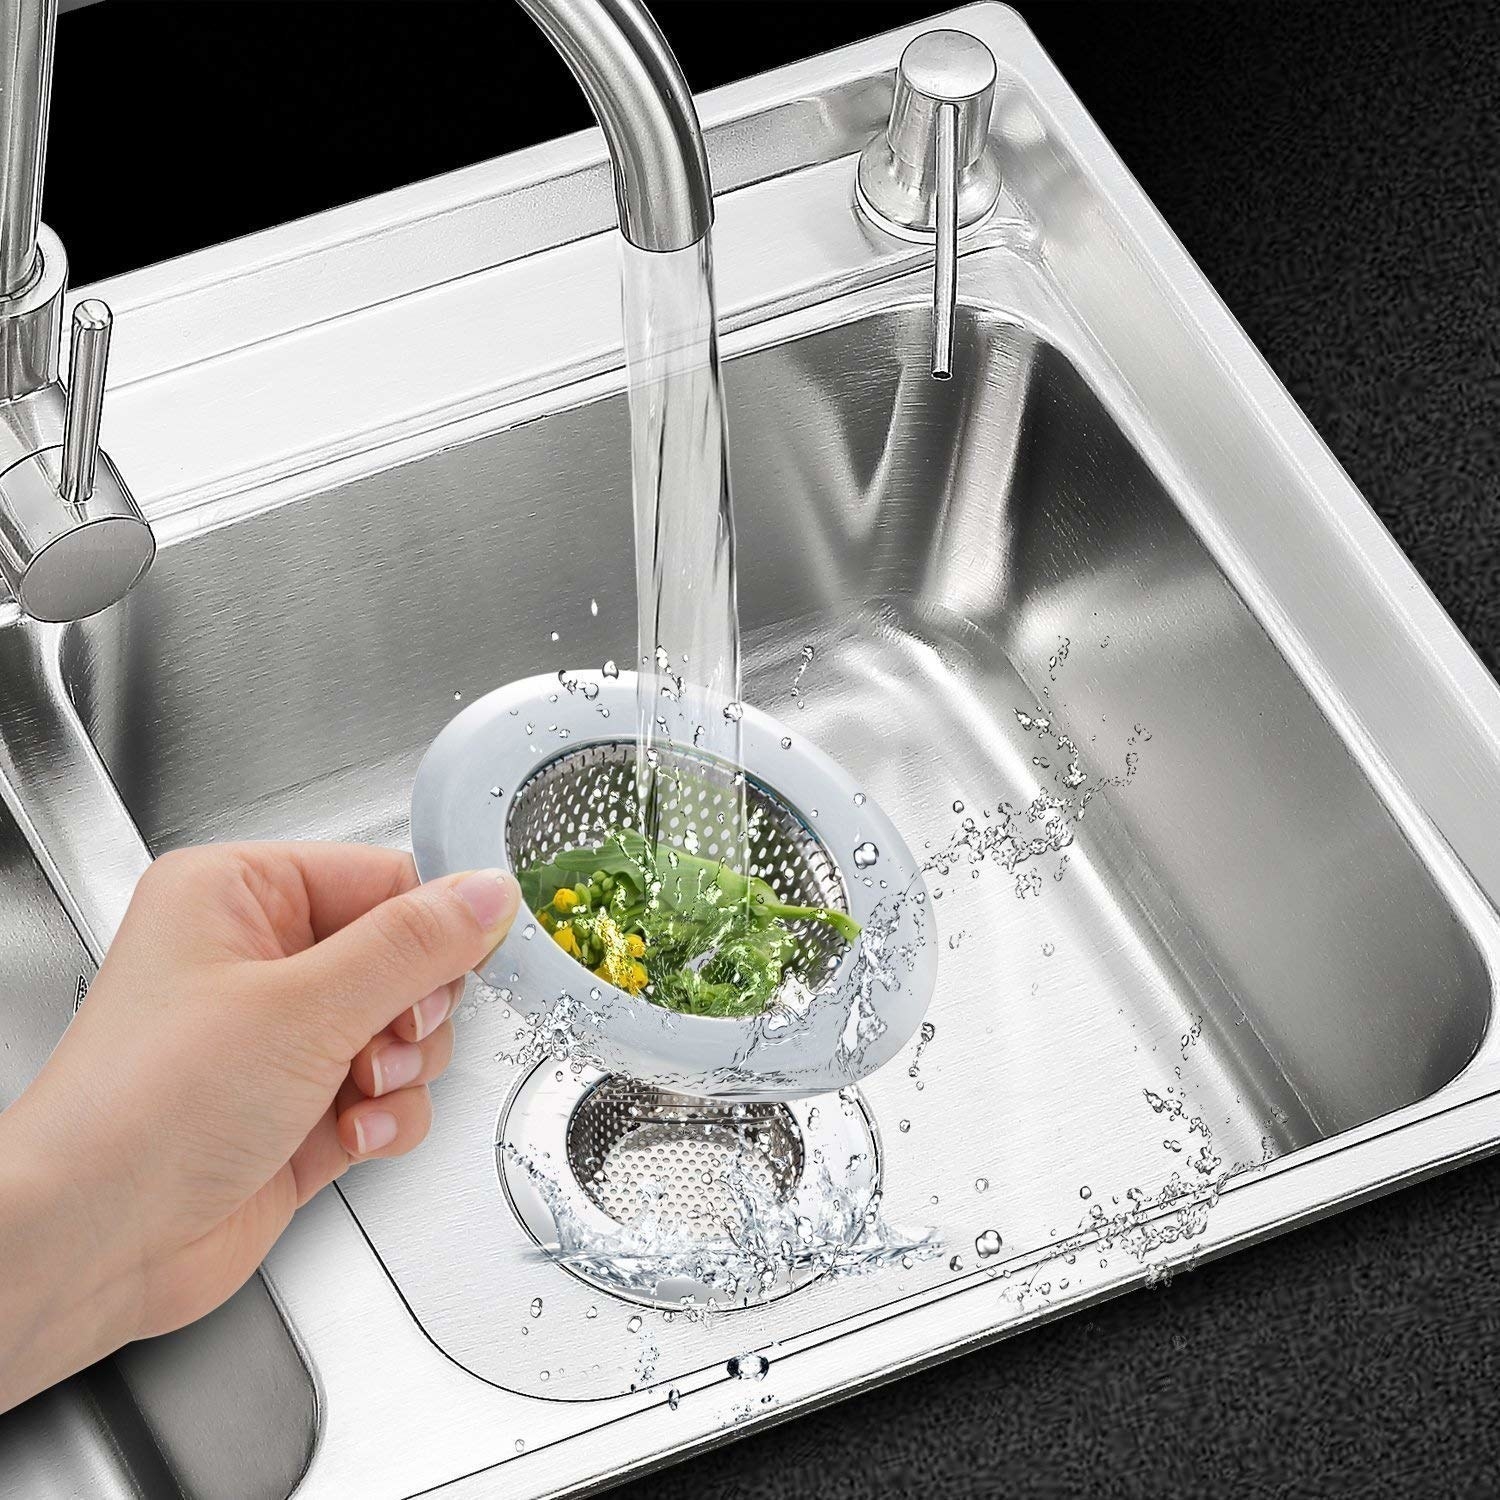 A person holding a stainless steel drainer with trash in it under a tap